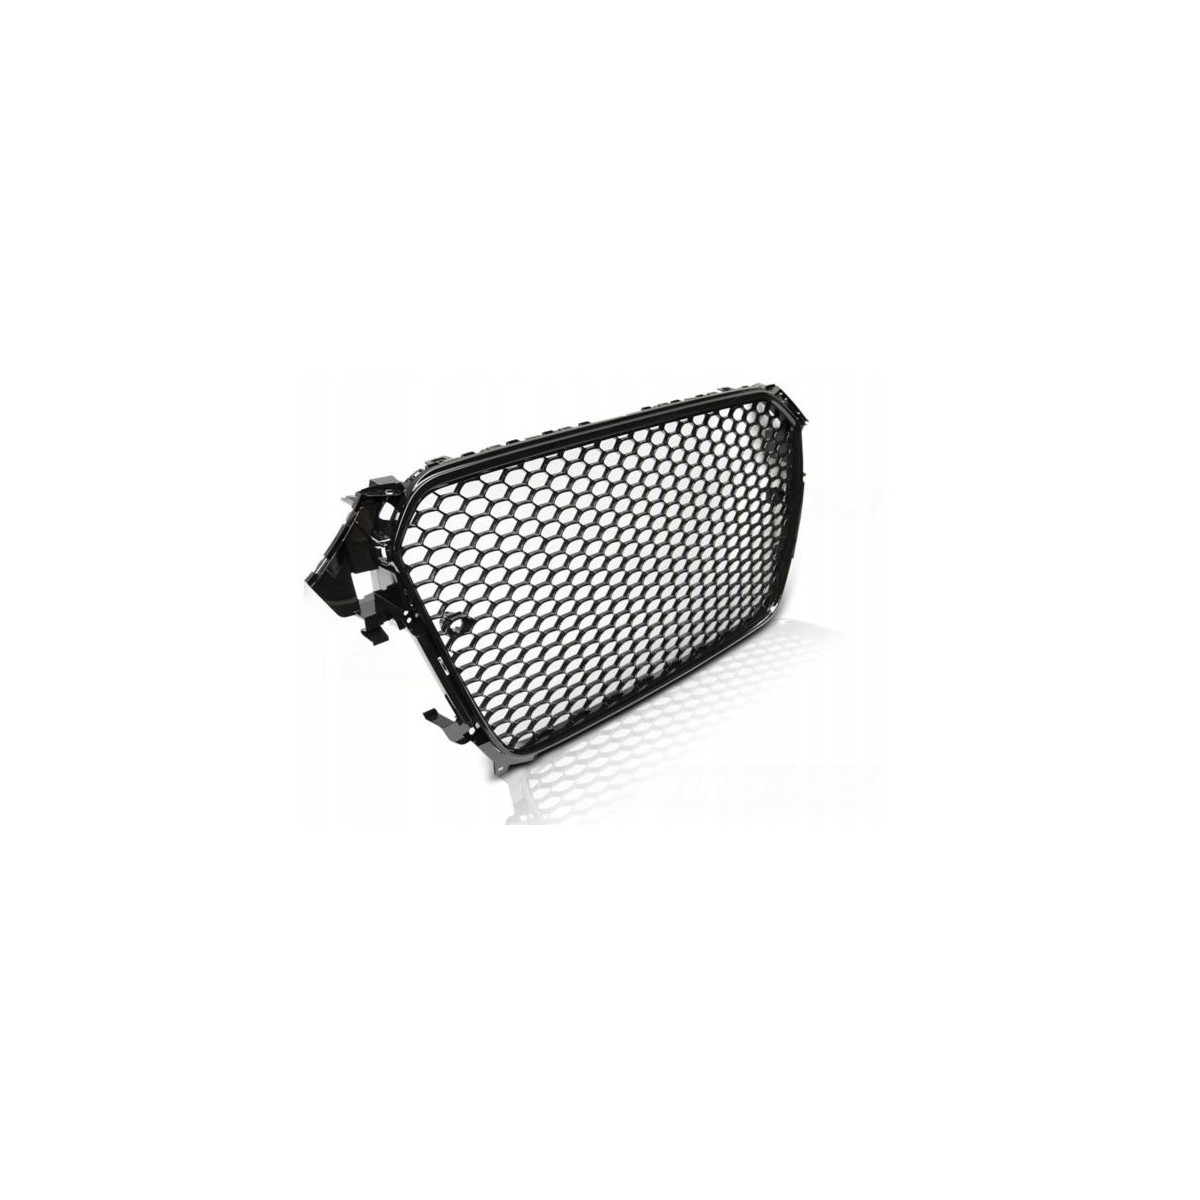 GRILL AUDI A4 B8 RS-TYPE 11-15 GLOSSY BLACK PDC